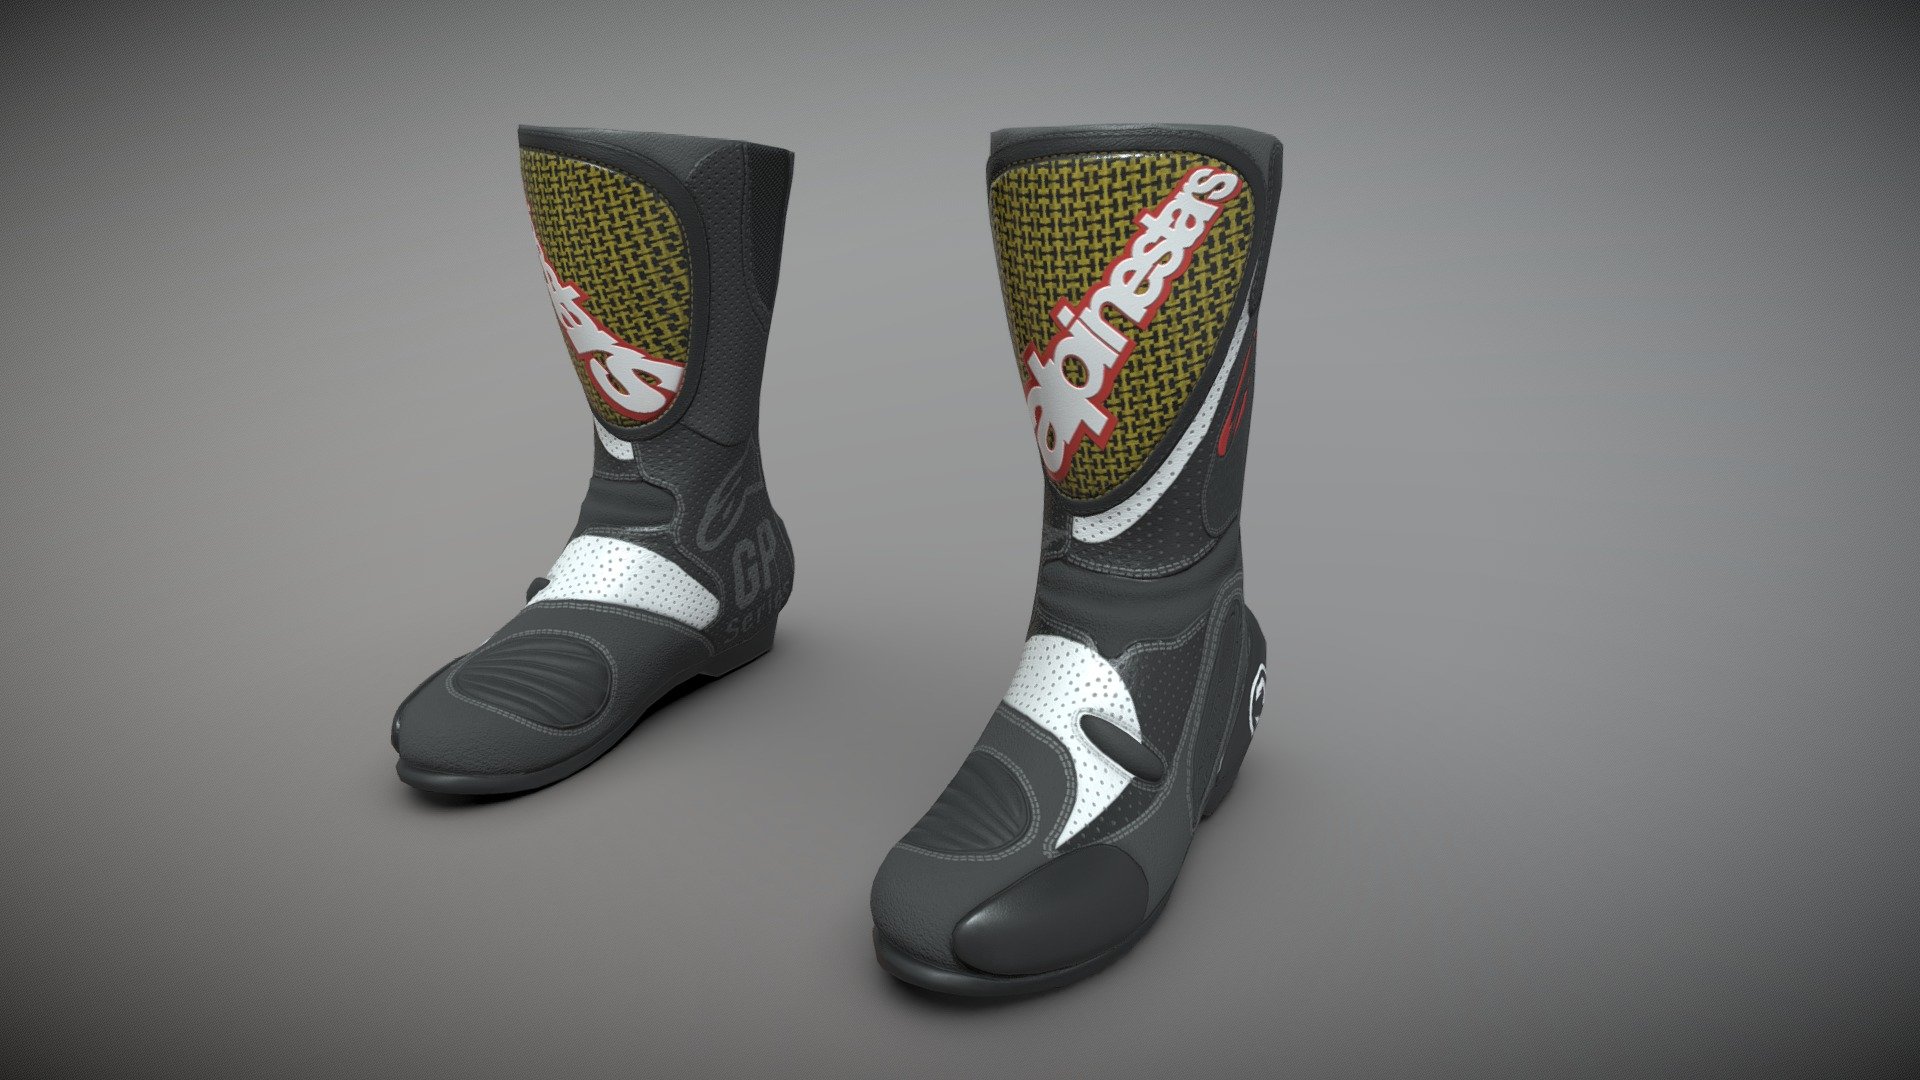 Alpinestars GP Tech Boots model. Modeled in Blender, textured in Substance painter. For the project MotoGP22 3d model